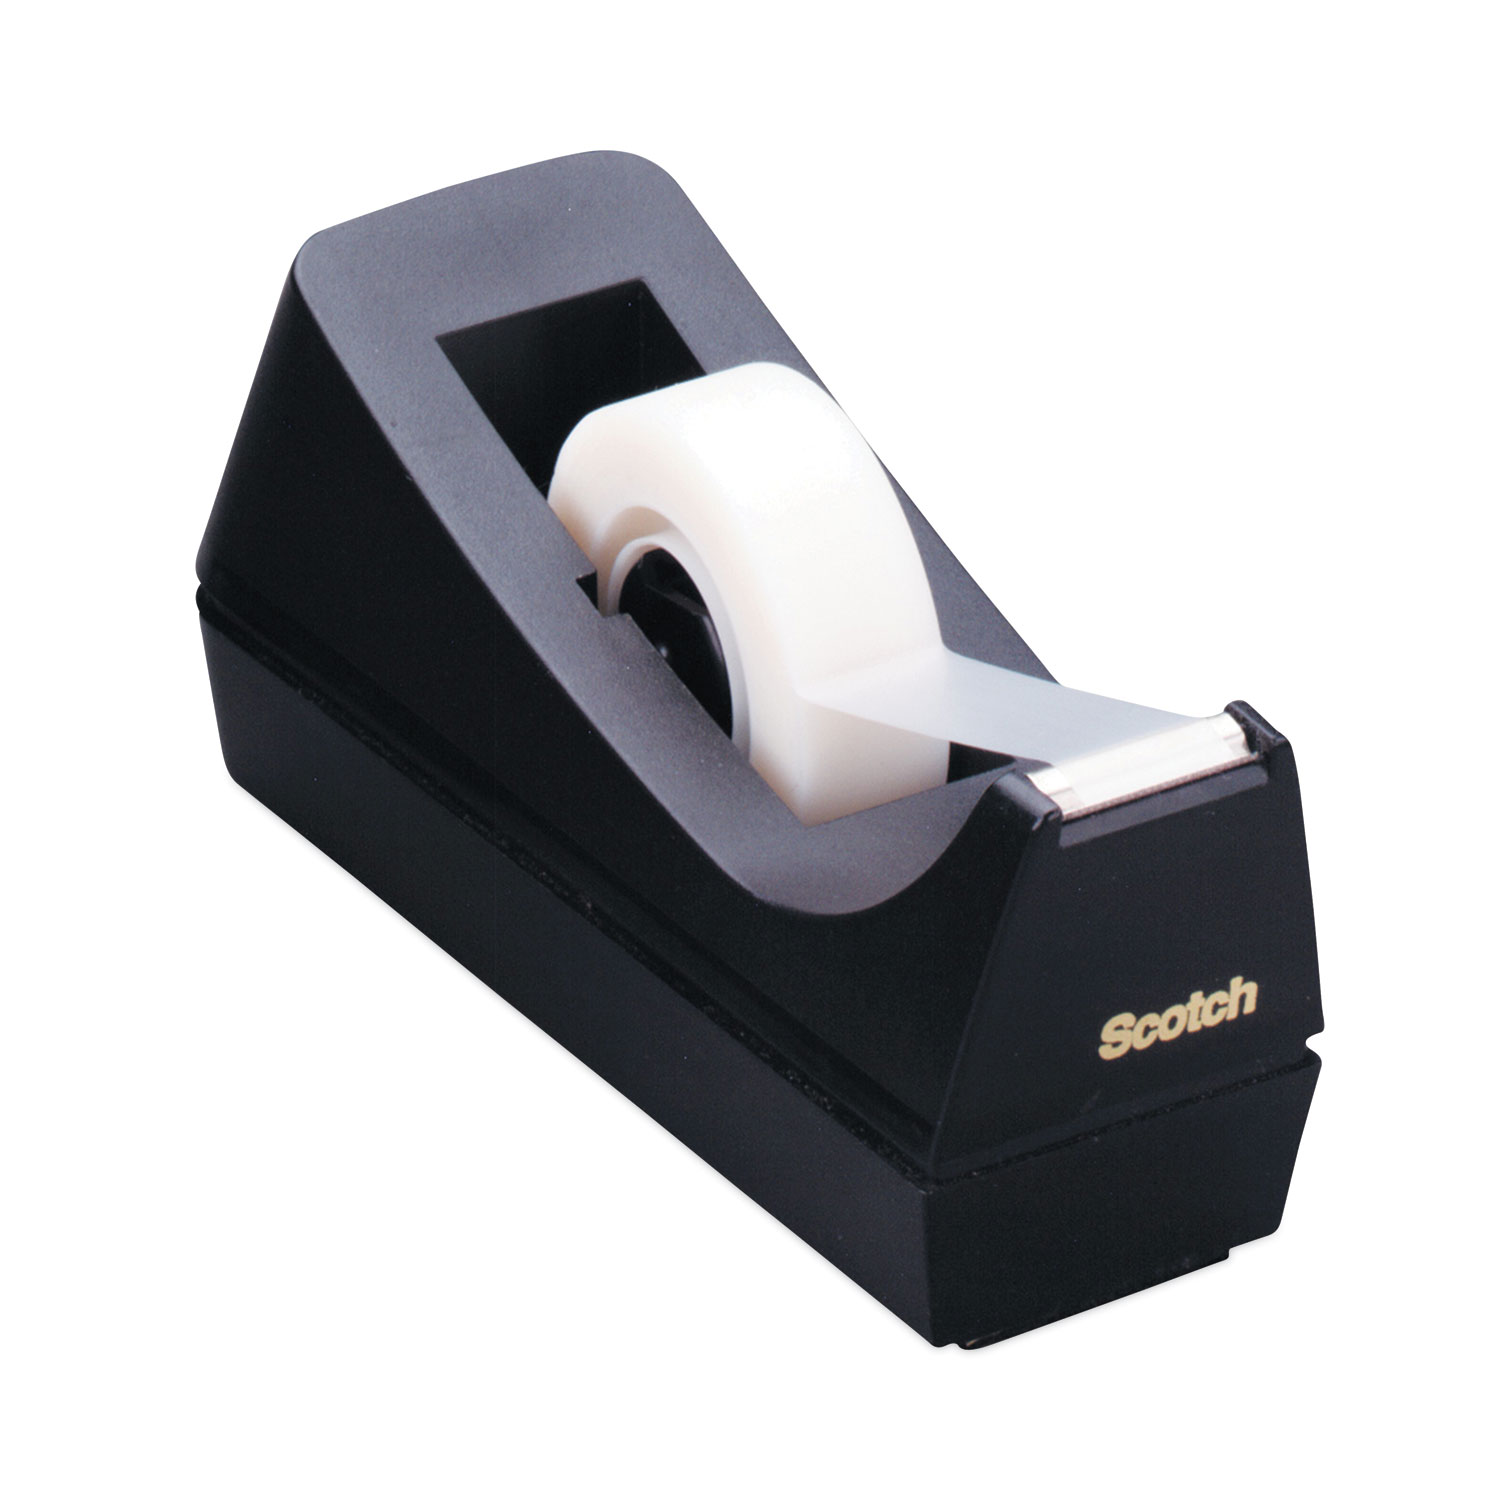 Scotch Desktop Tape Dispenser Made of 100% Recycled Plastic C-38-3PK-SIOC - 1 Non-Skid Base Weighted Black 3-Pack 